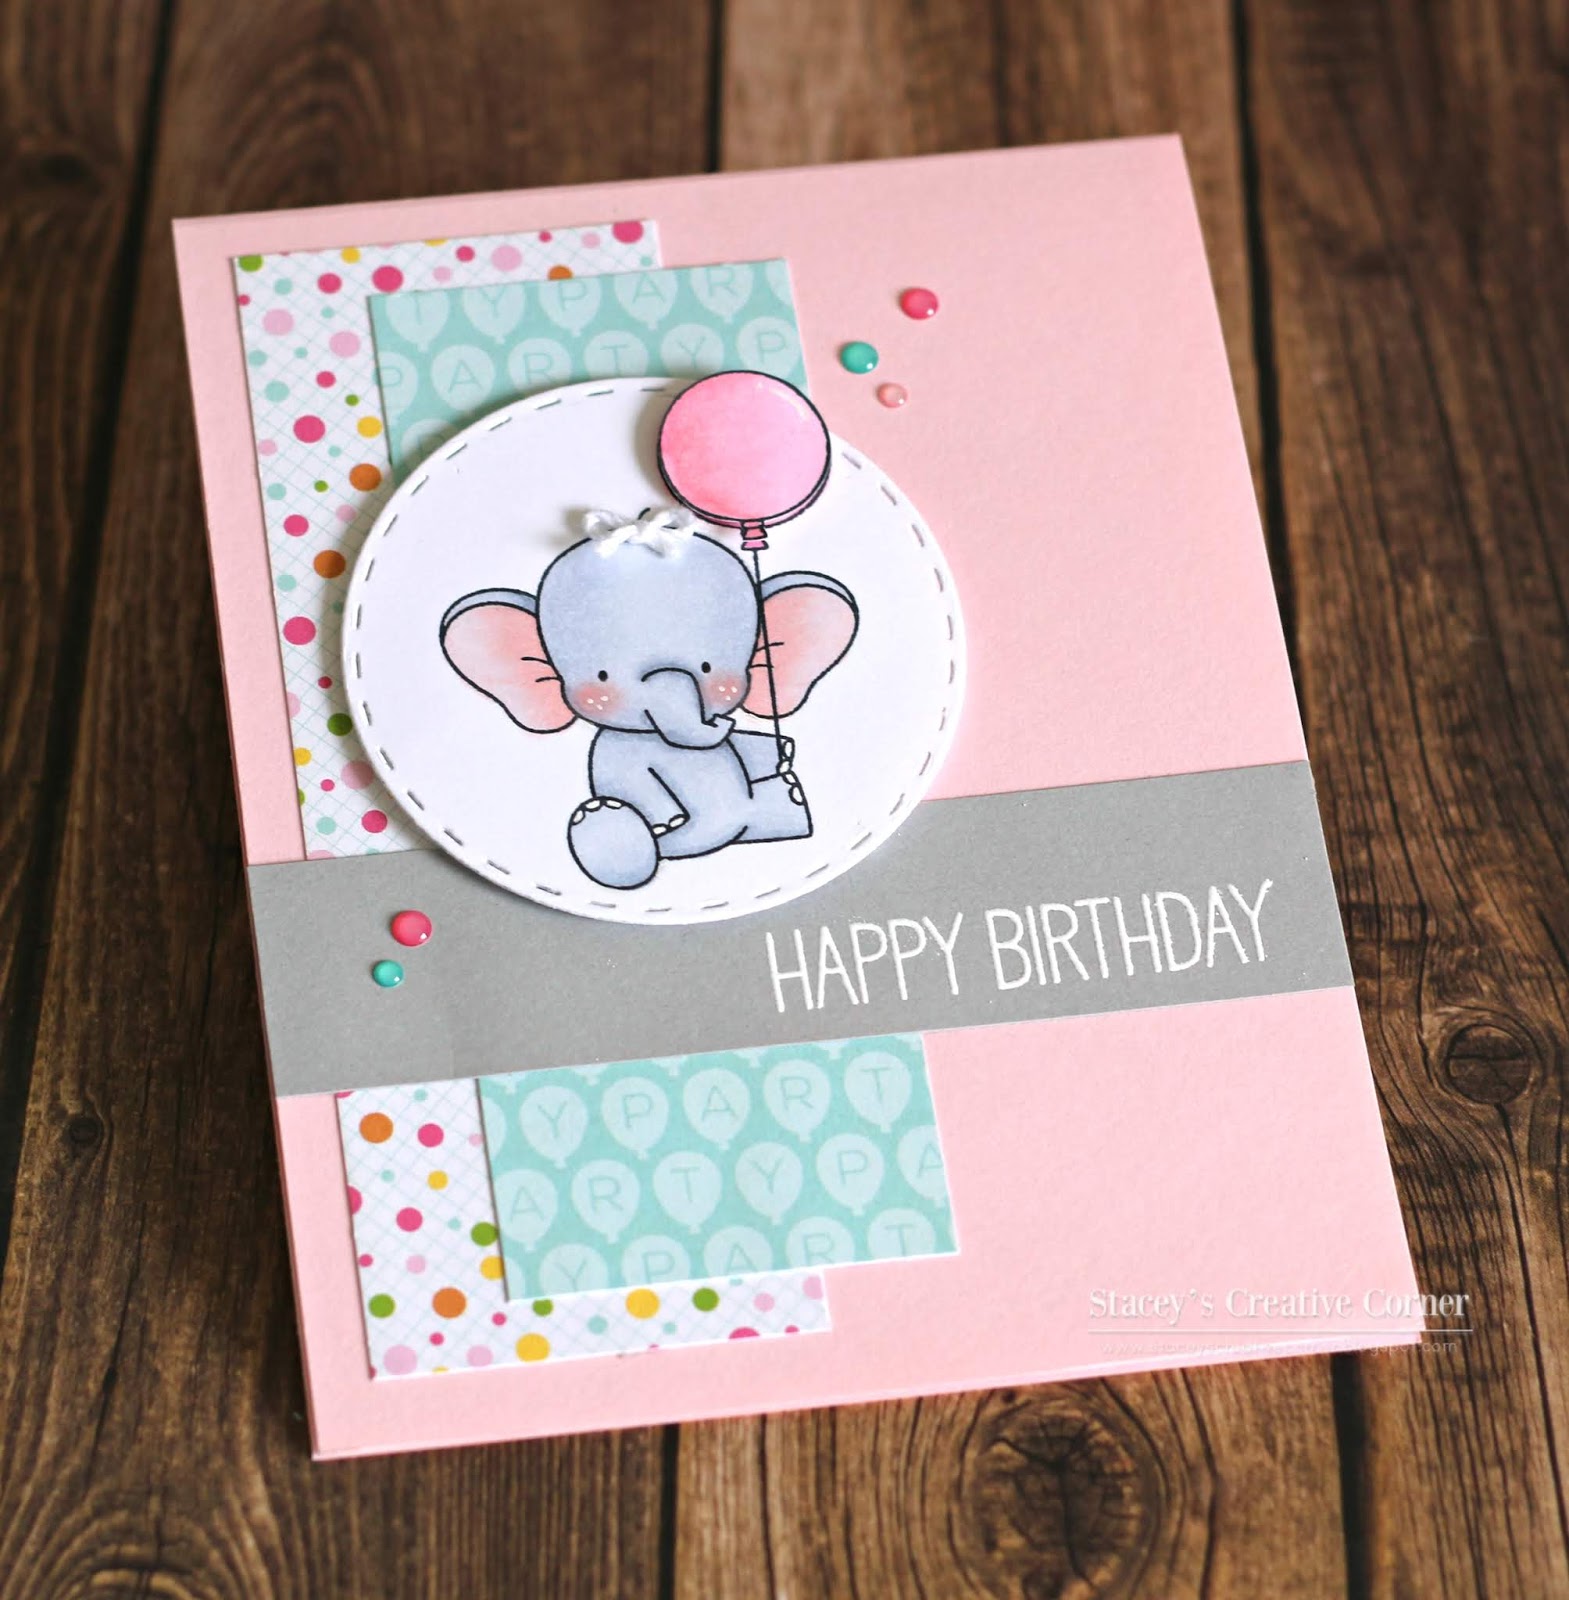 Stacey's Creative Corner: Clean and Simple Birthday Card